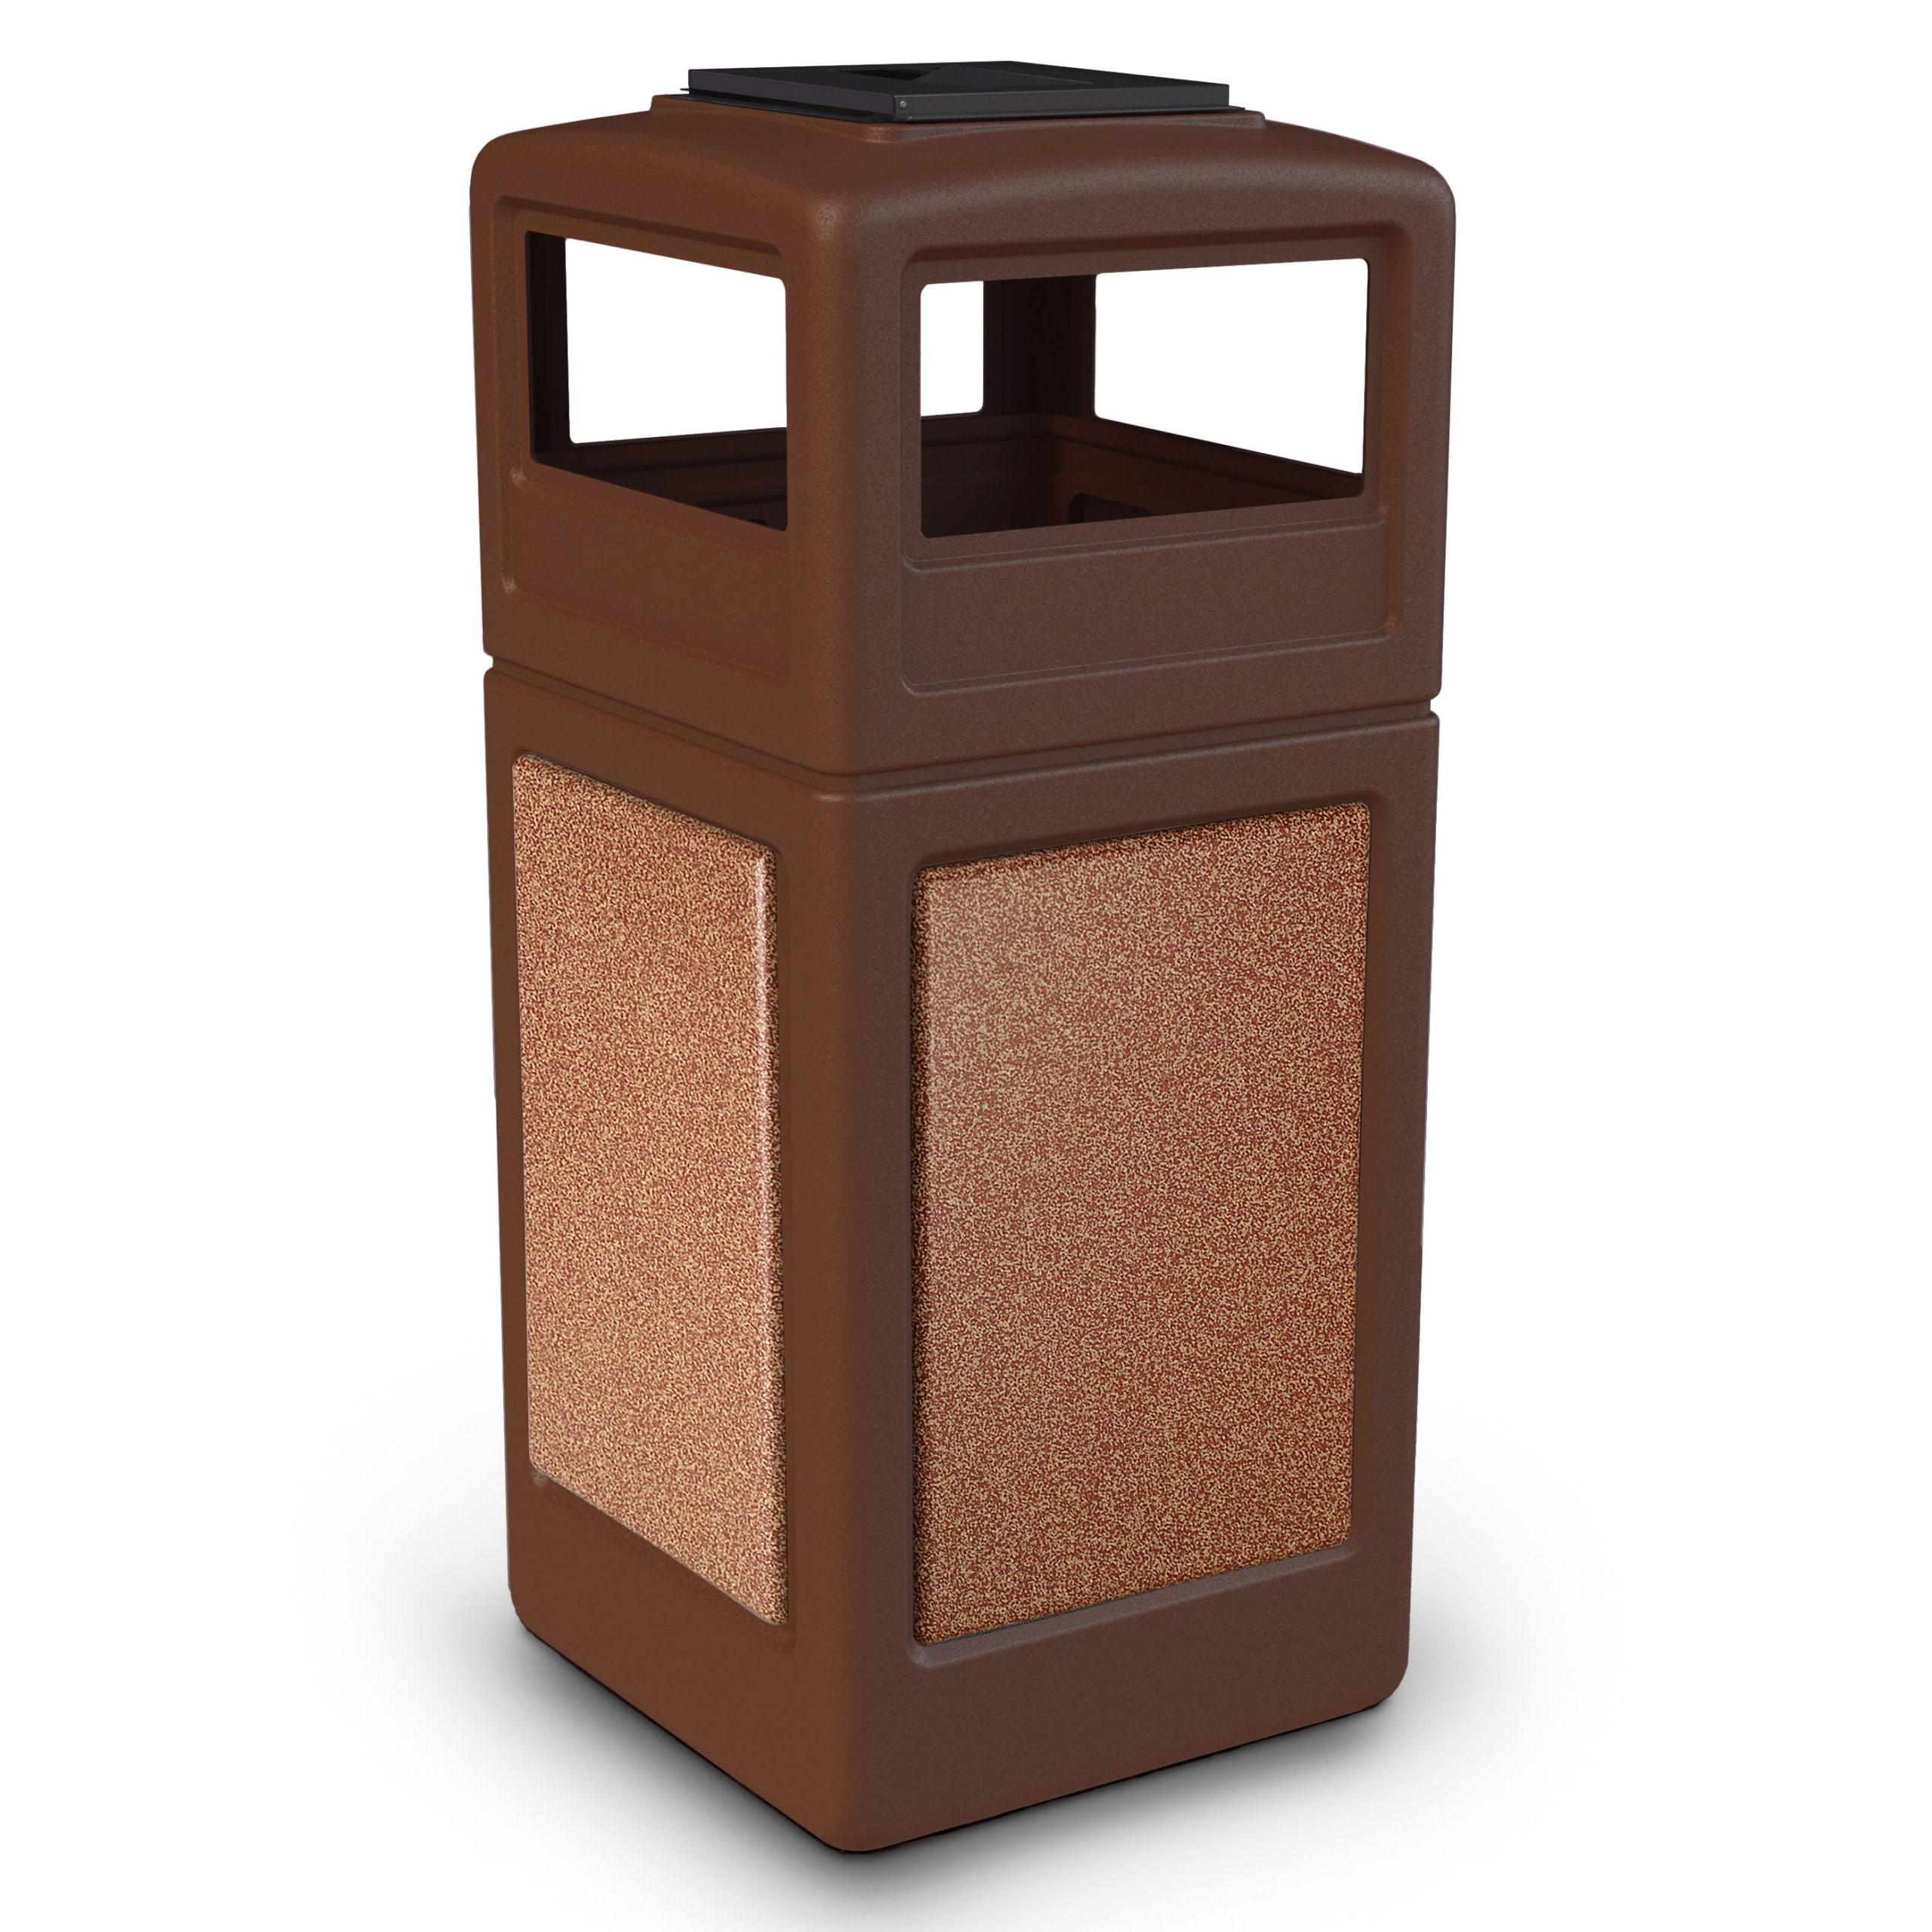 The Home Depot 42 gal. Kraft 100% Recycled Disposable Trash Can Box 40KTB -  The Home Depot